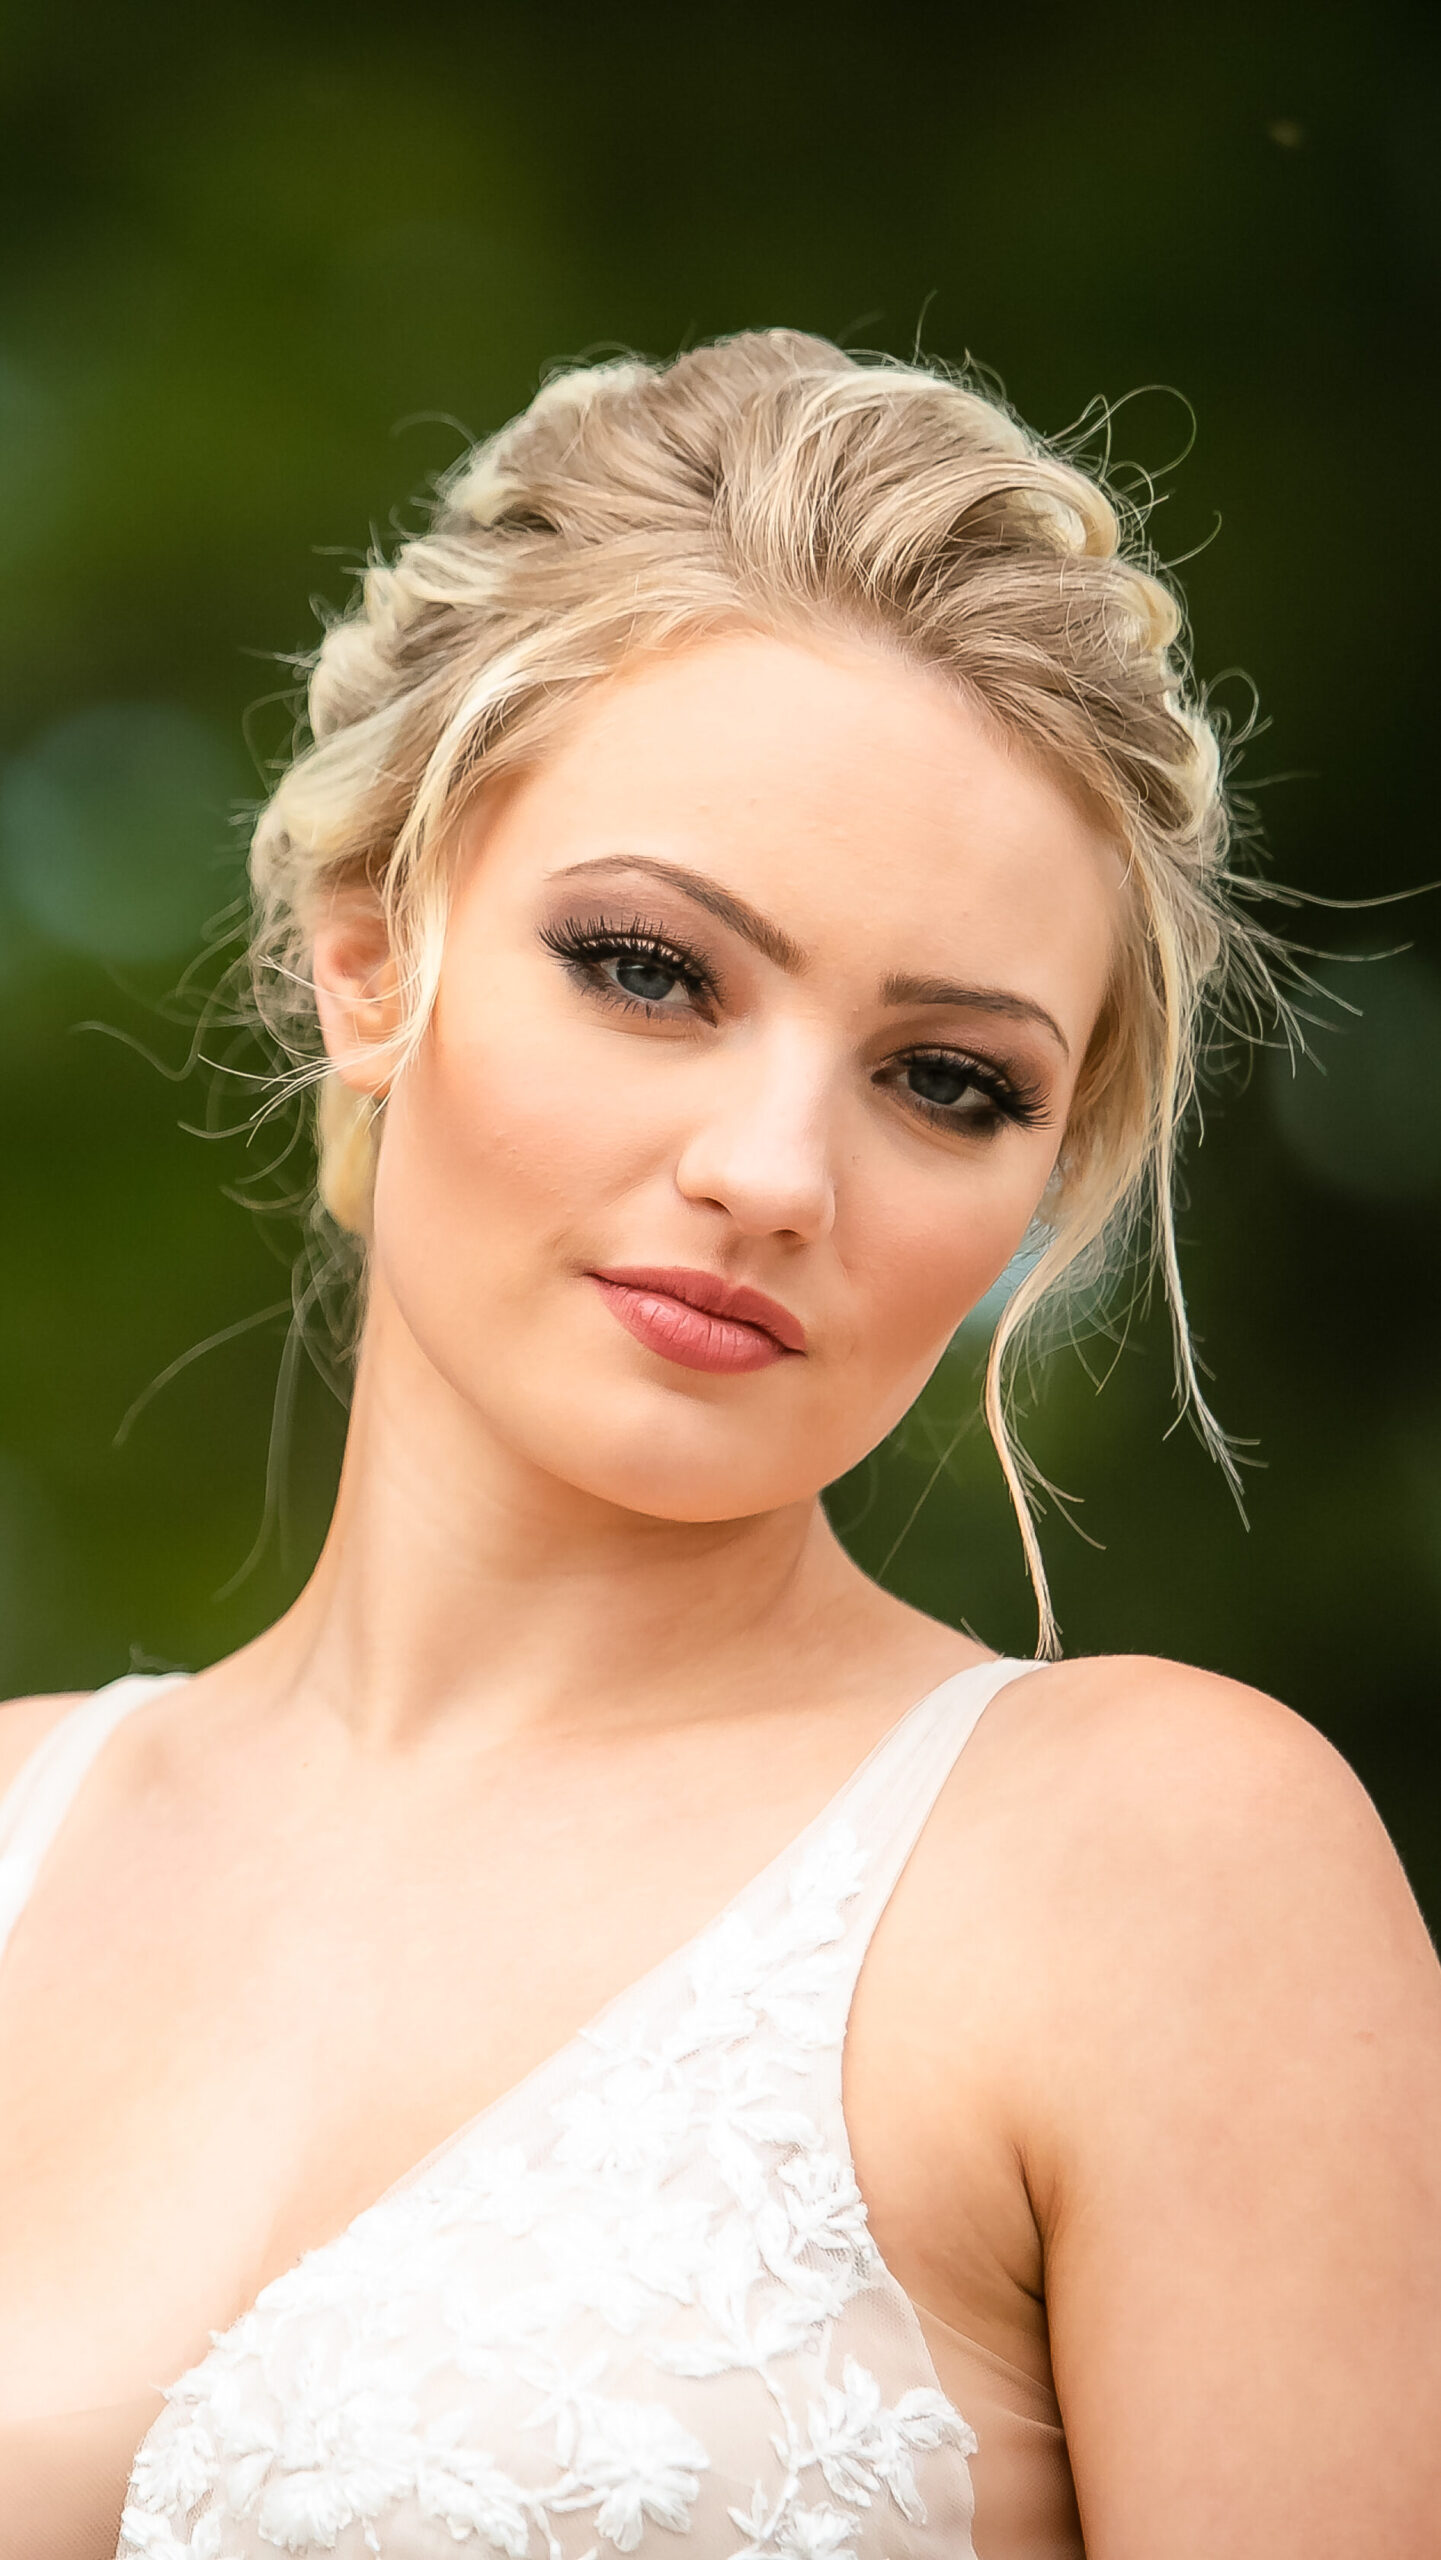 Natural looking false lashes are a top bridal makeup look for 2023